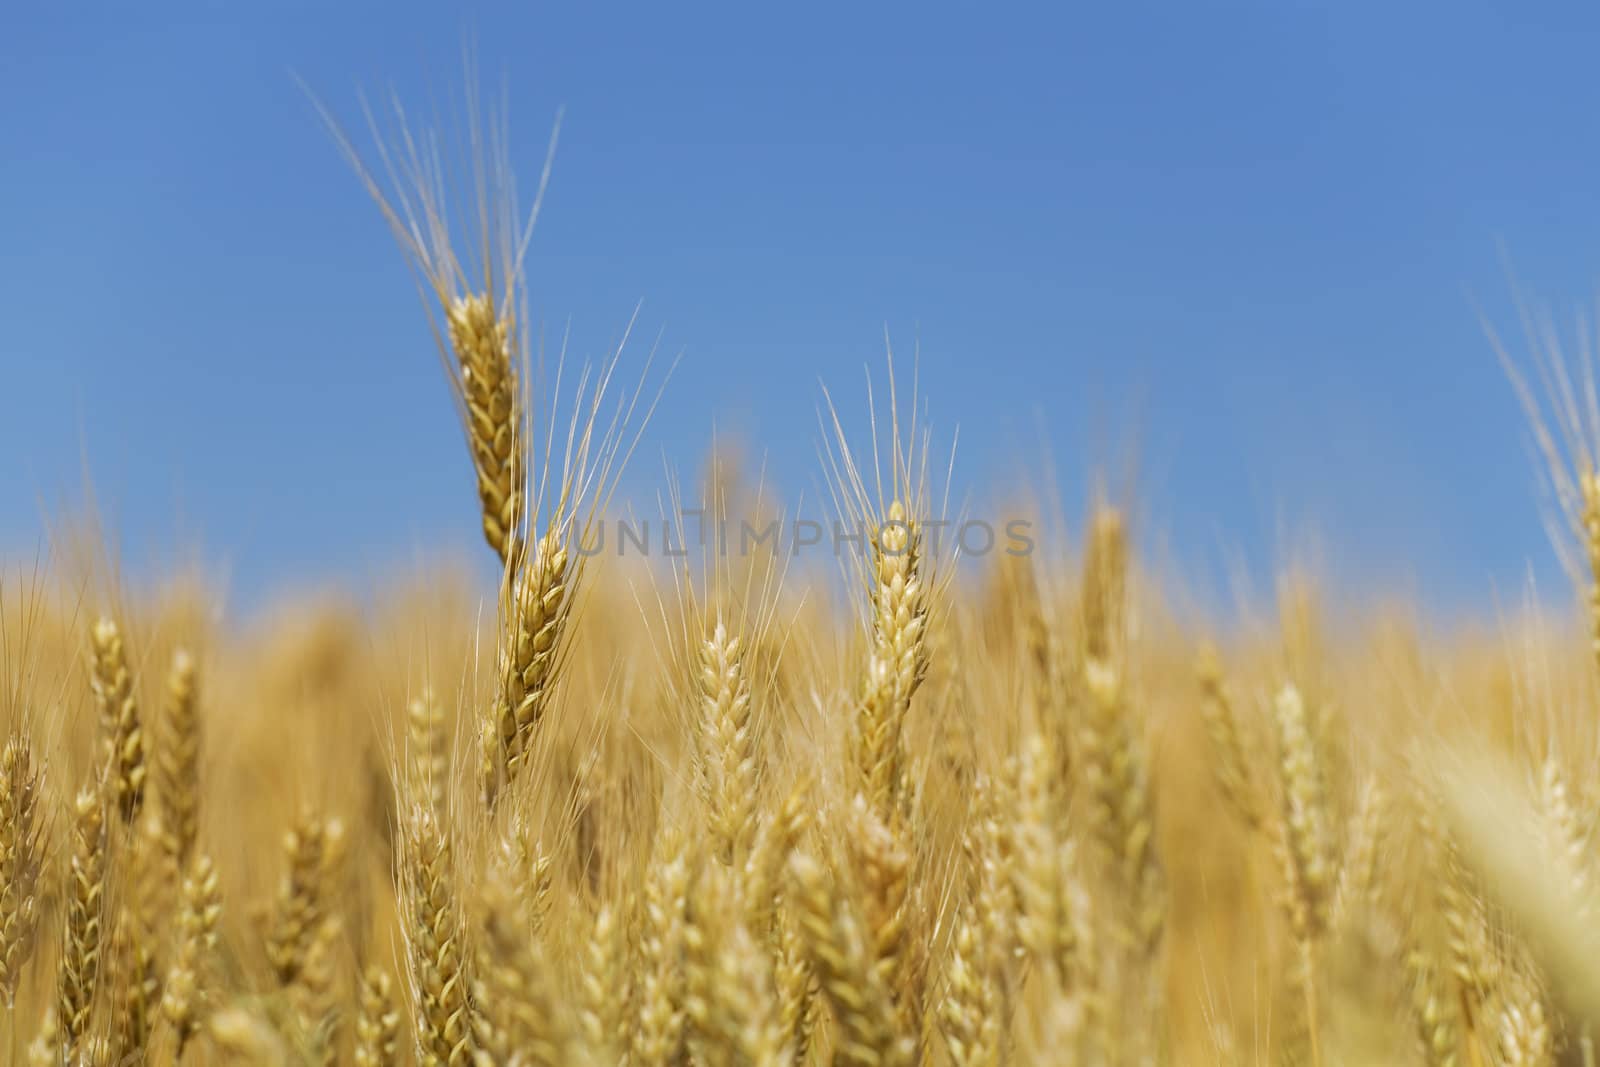 field of a golden wheat before harvesting on a background clear blue sky